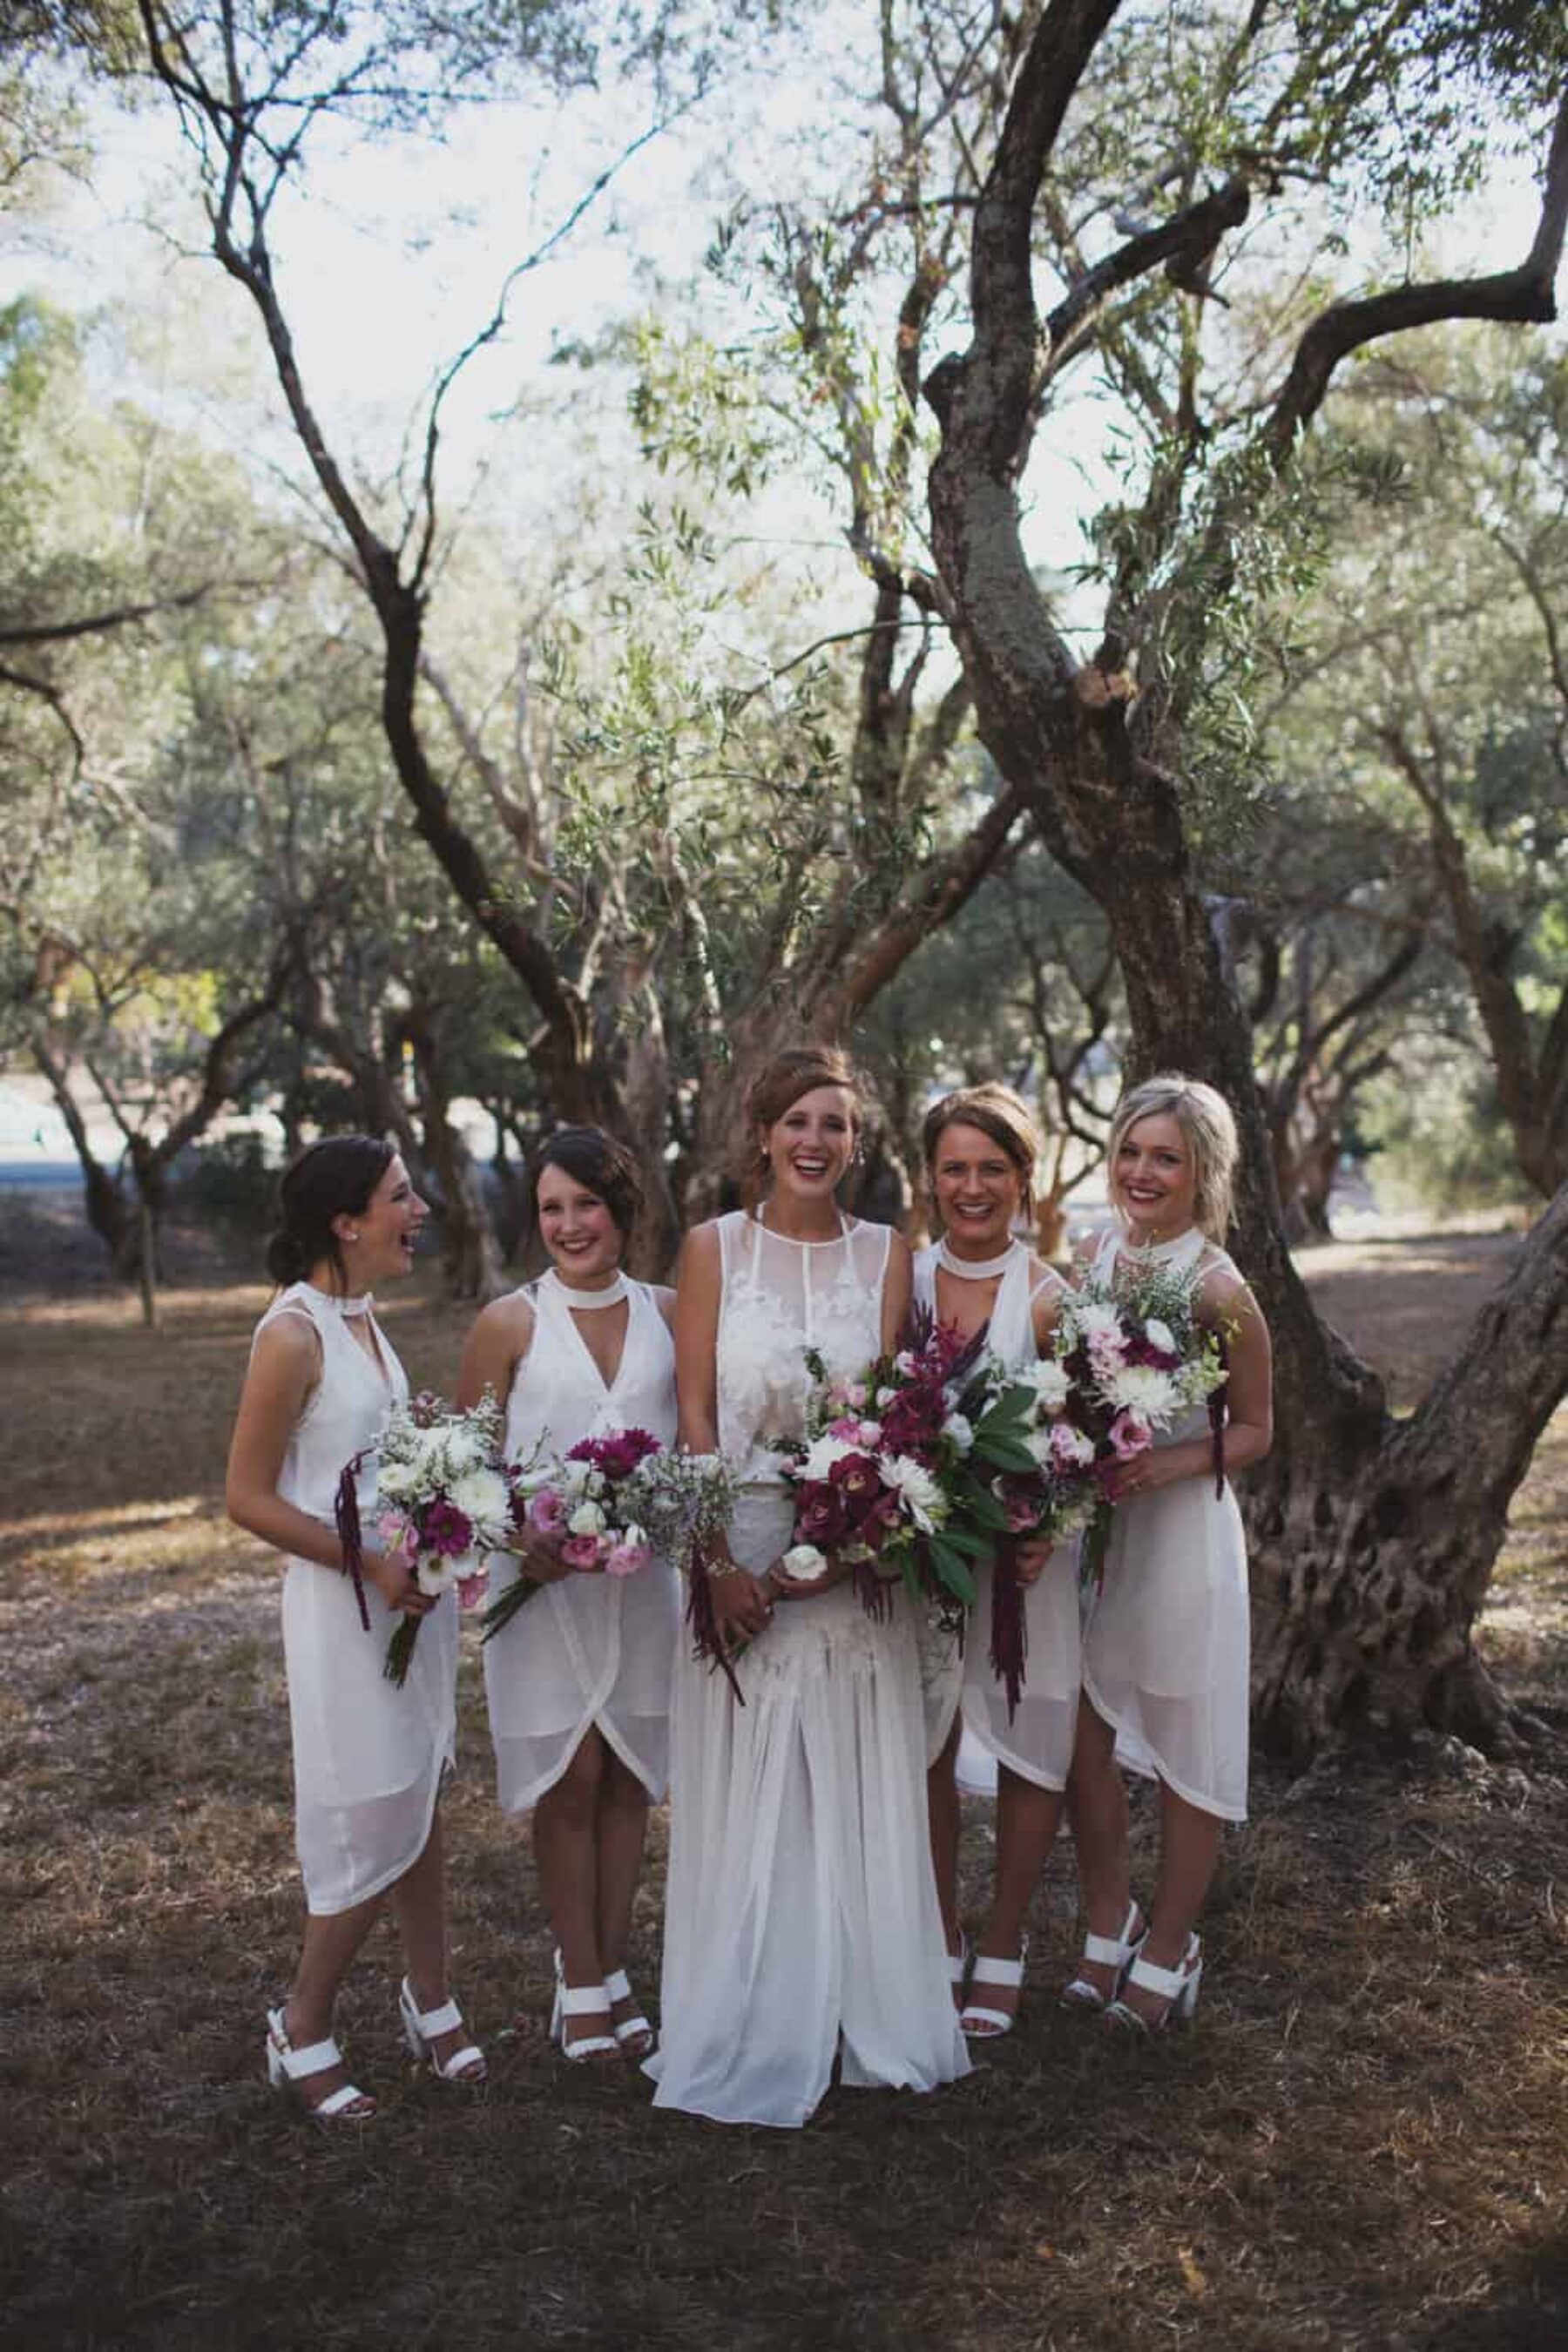 White bridesmaids dresses by Keepsake the Label / Whitewall Photography